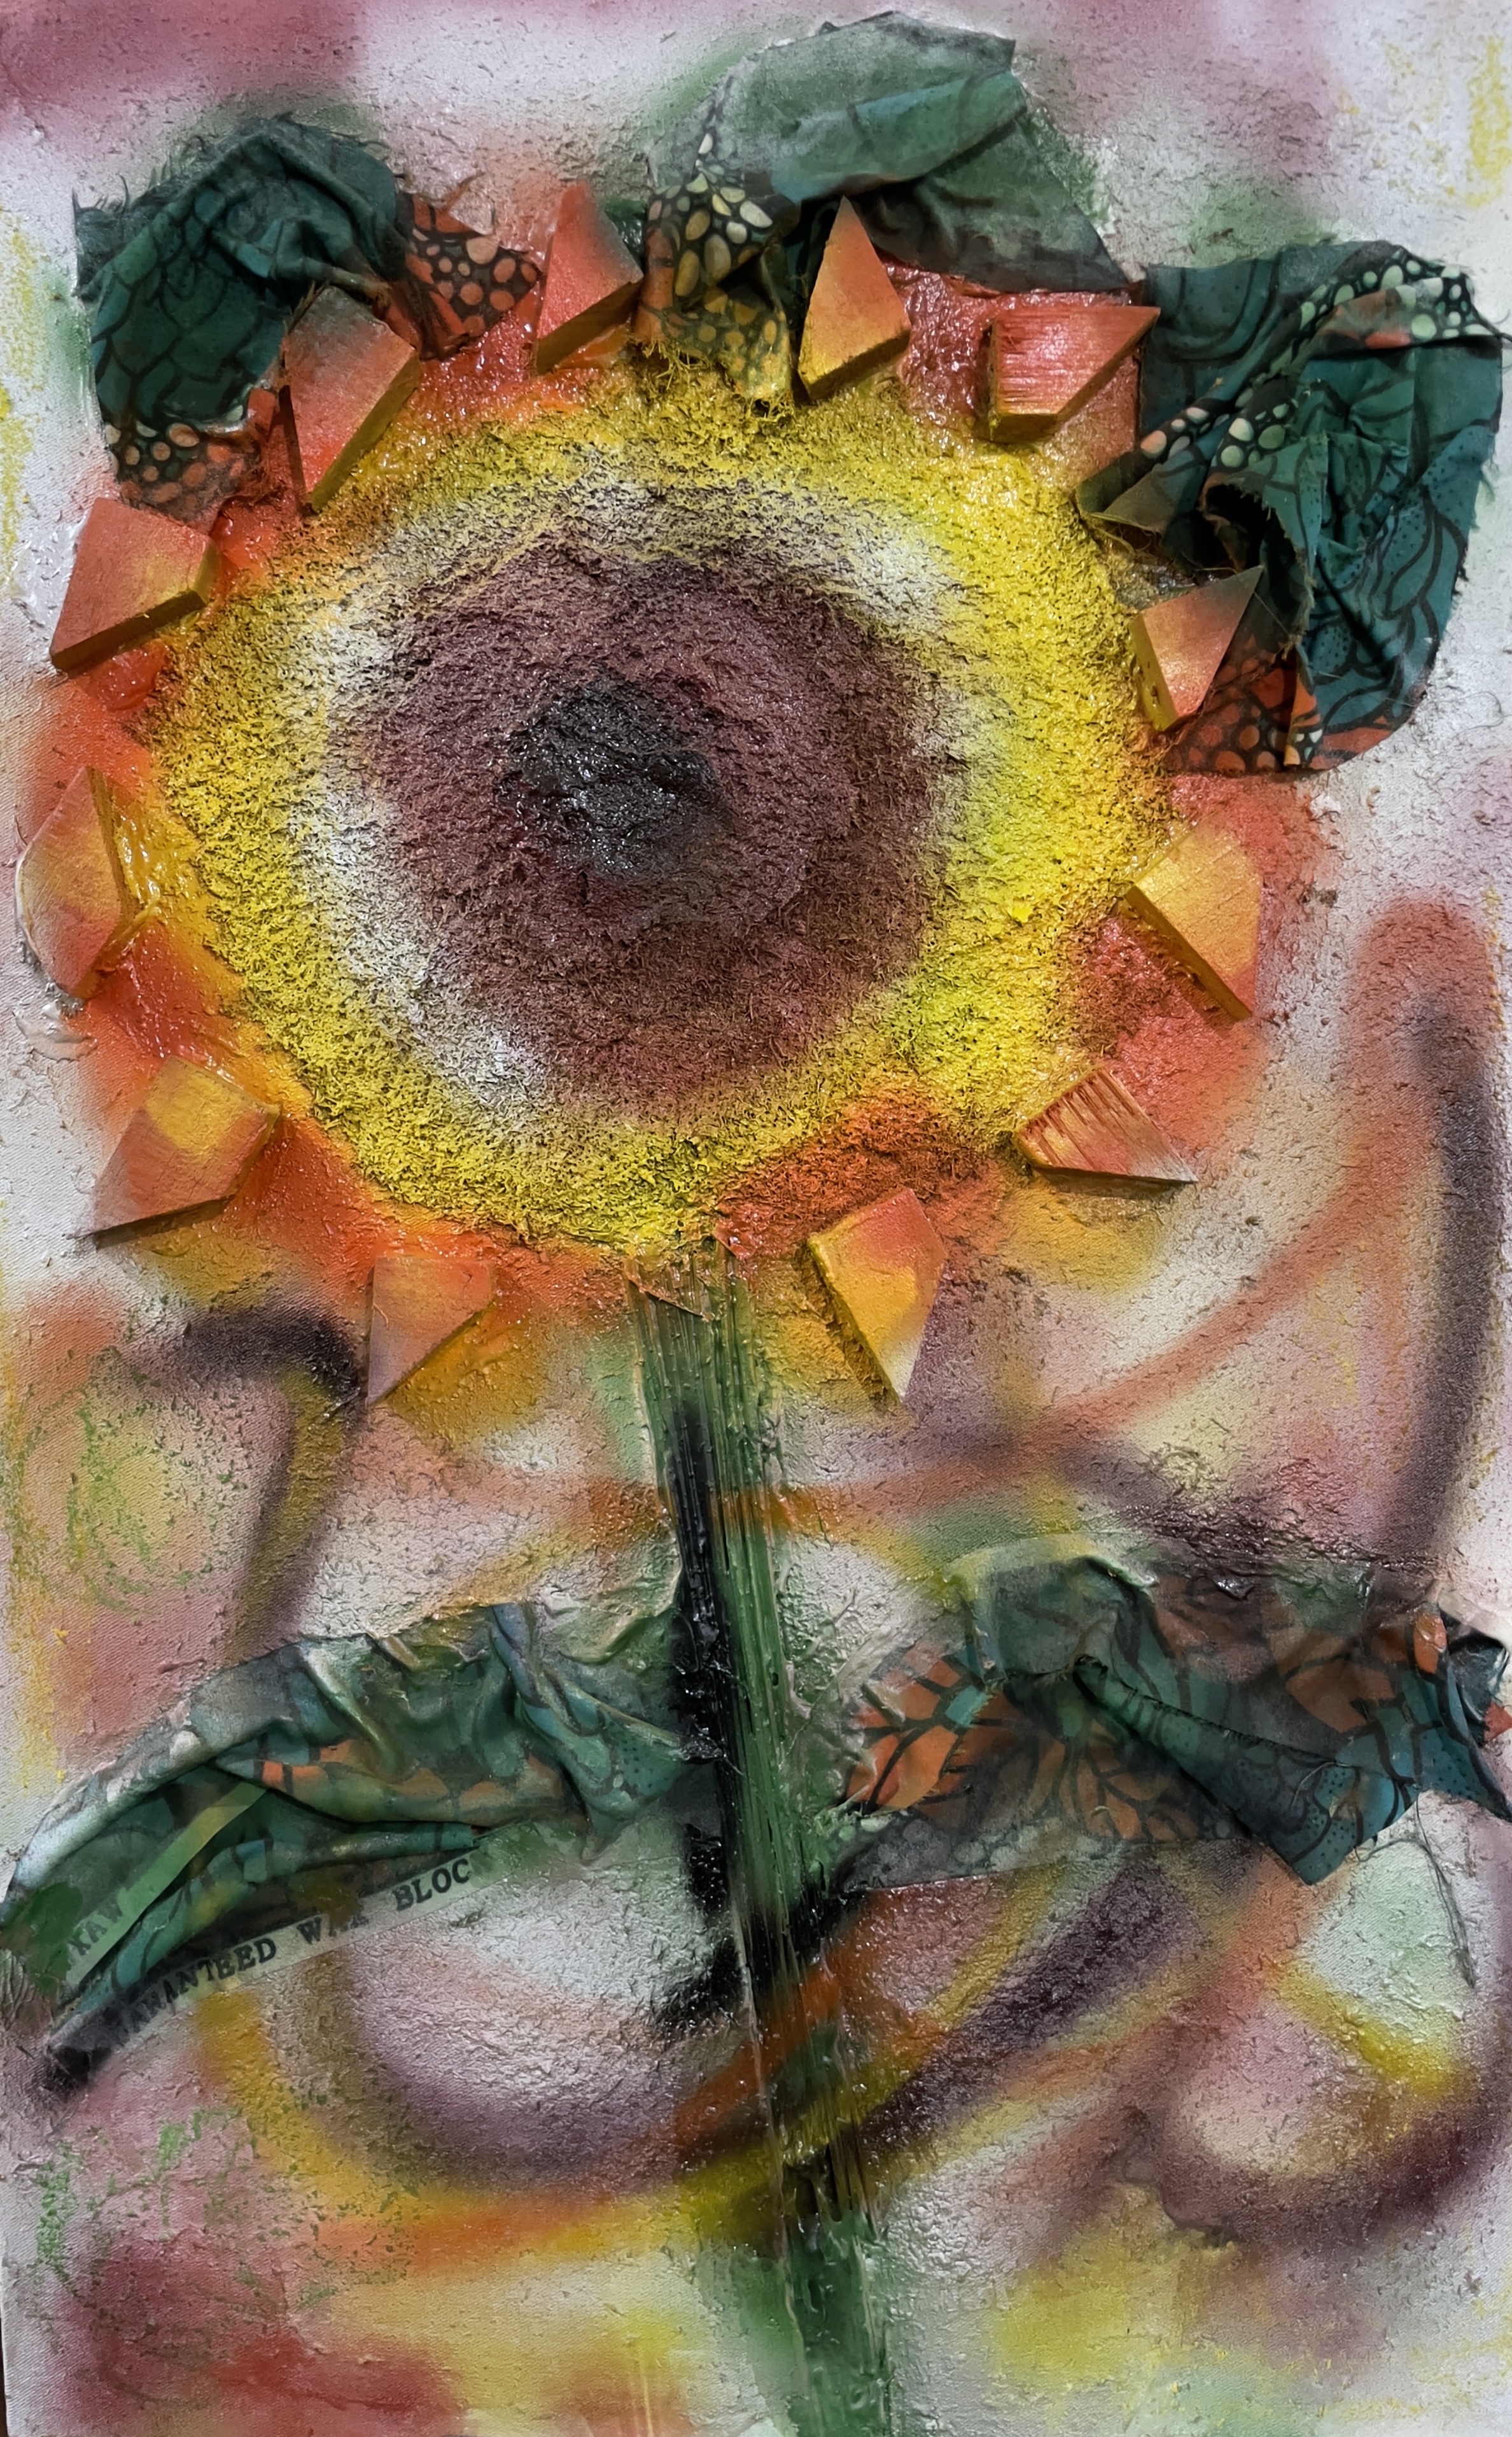 Chinedu, "Bloom", mixed media, 17.5 x 70cm, c. 2021. The beauty in new beginnings as a flower blooms